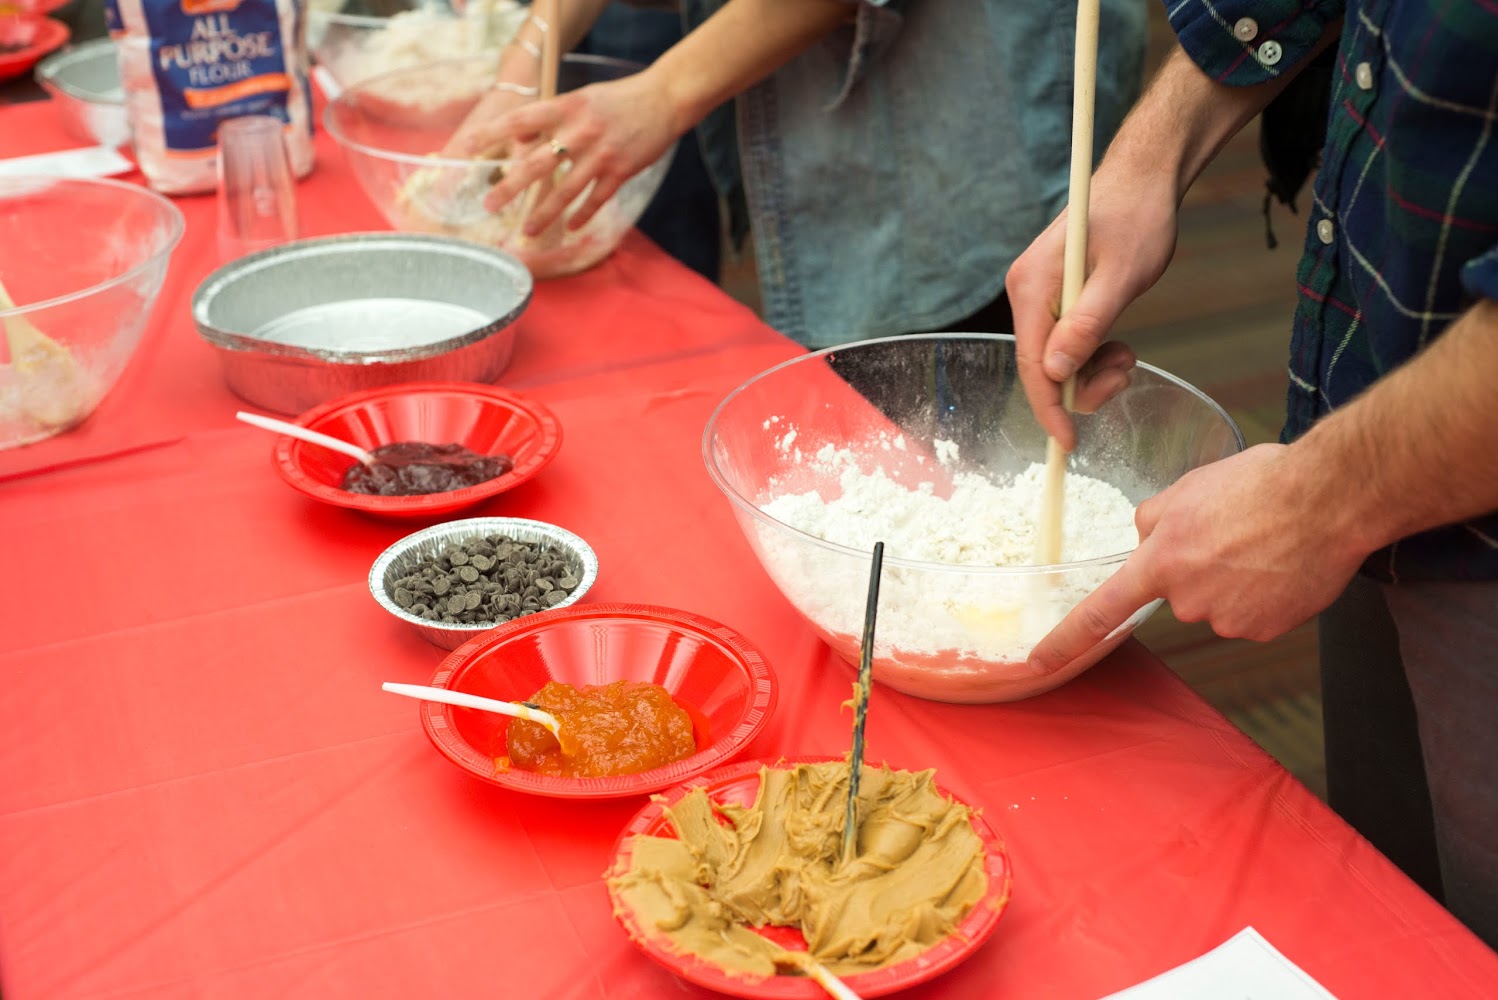 "We held the event as a way for students to get together to celebrate the holiday as a community," Renetzky noted. "It was great, a nice intimate and exciting positive environment which served as a nice break to midterms stress. ...Both Jews and non-Jews alike came by to make some Hamantaschen and learn about why we make them in the first place. I'd say the event was definitely a success."